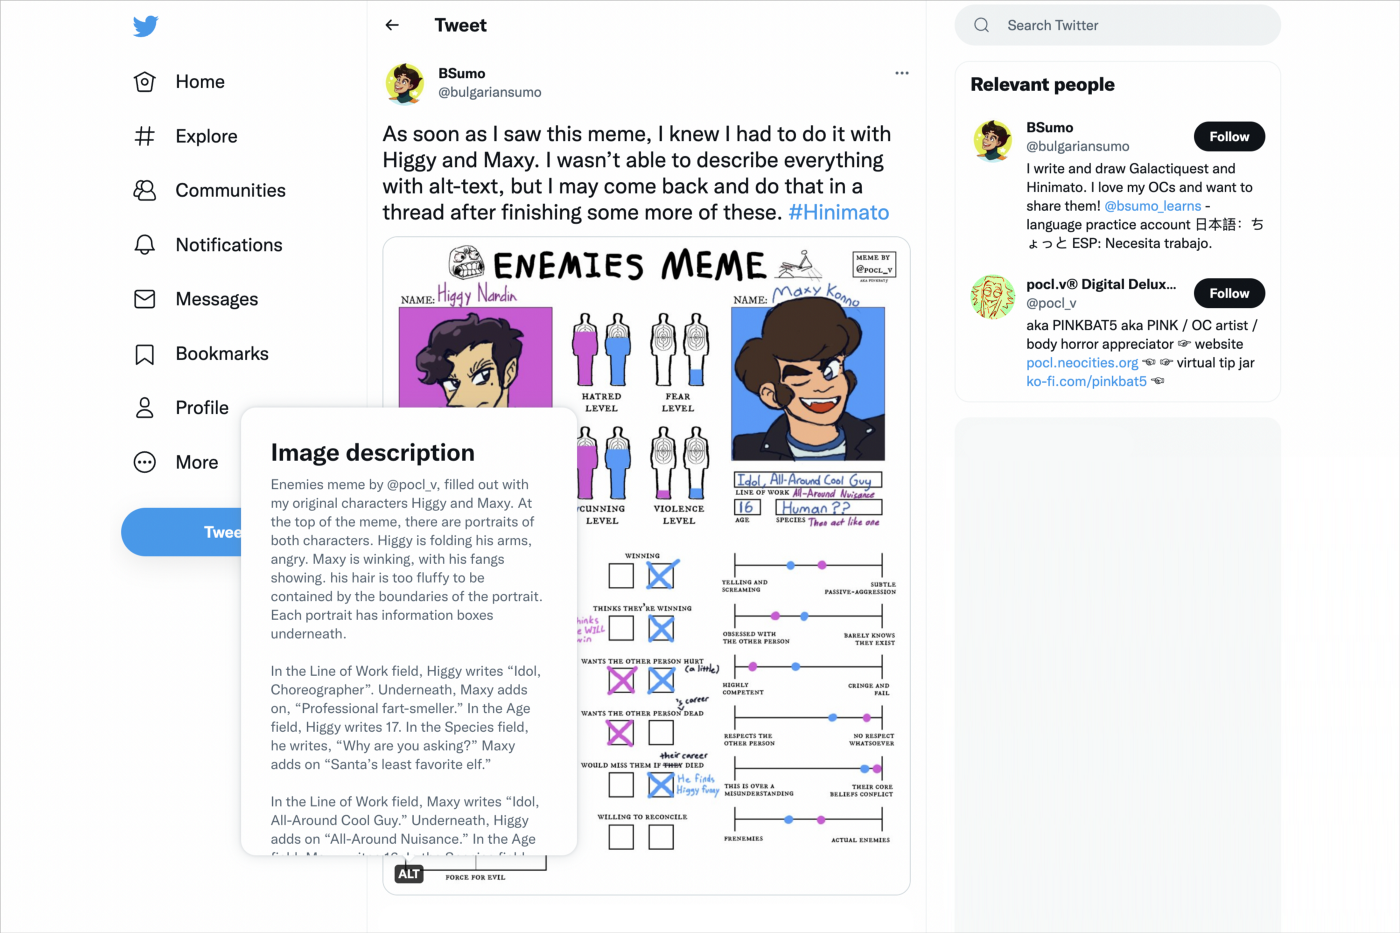 A tweet featuring the “enemies meme” with two characters, Higgy and Maxy, and a detailed image description (three paragraphs of text).